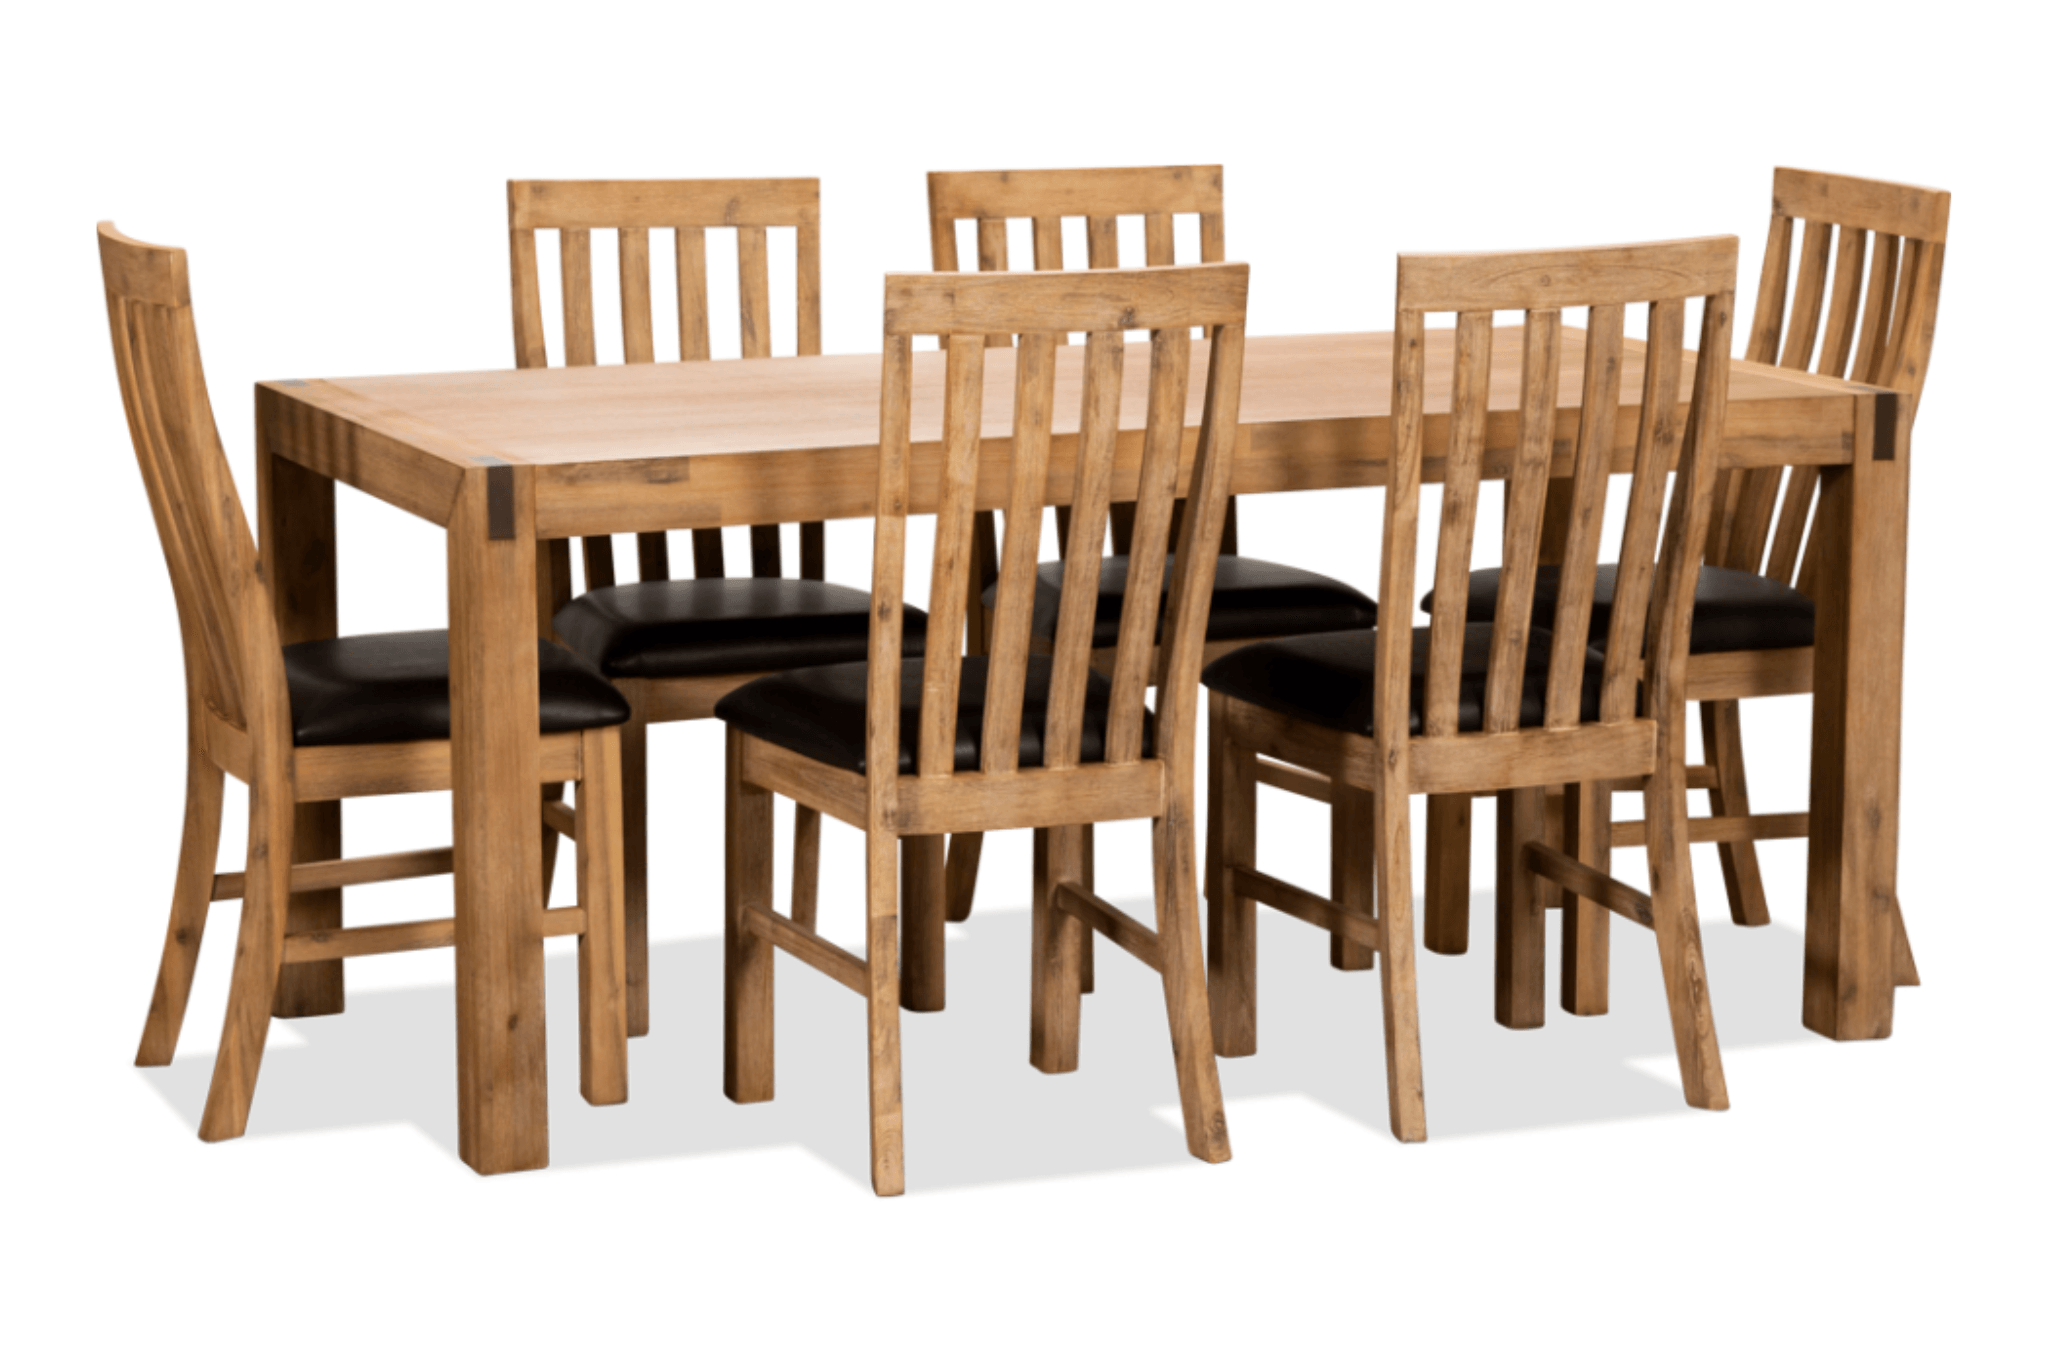 Jayden Dining Set - 7 Piece Dining Table Set with Acacia Wood Construction and PU Leather Chairs